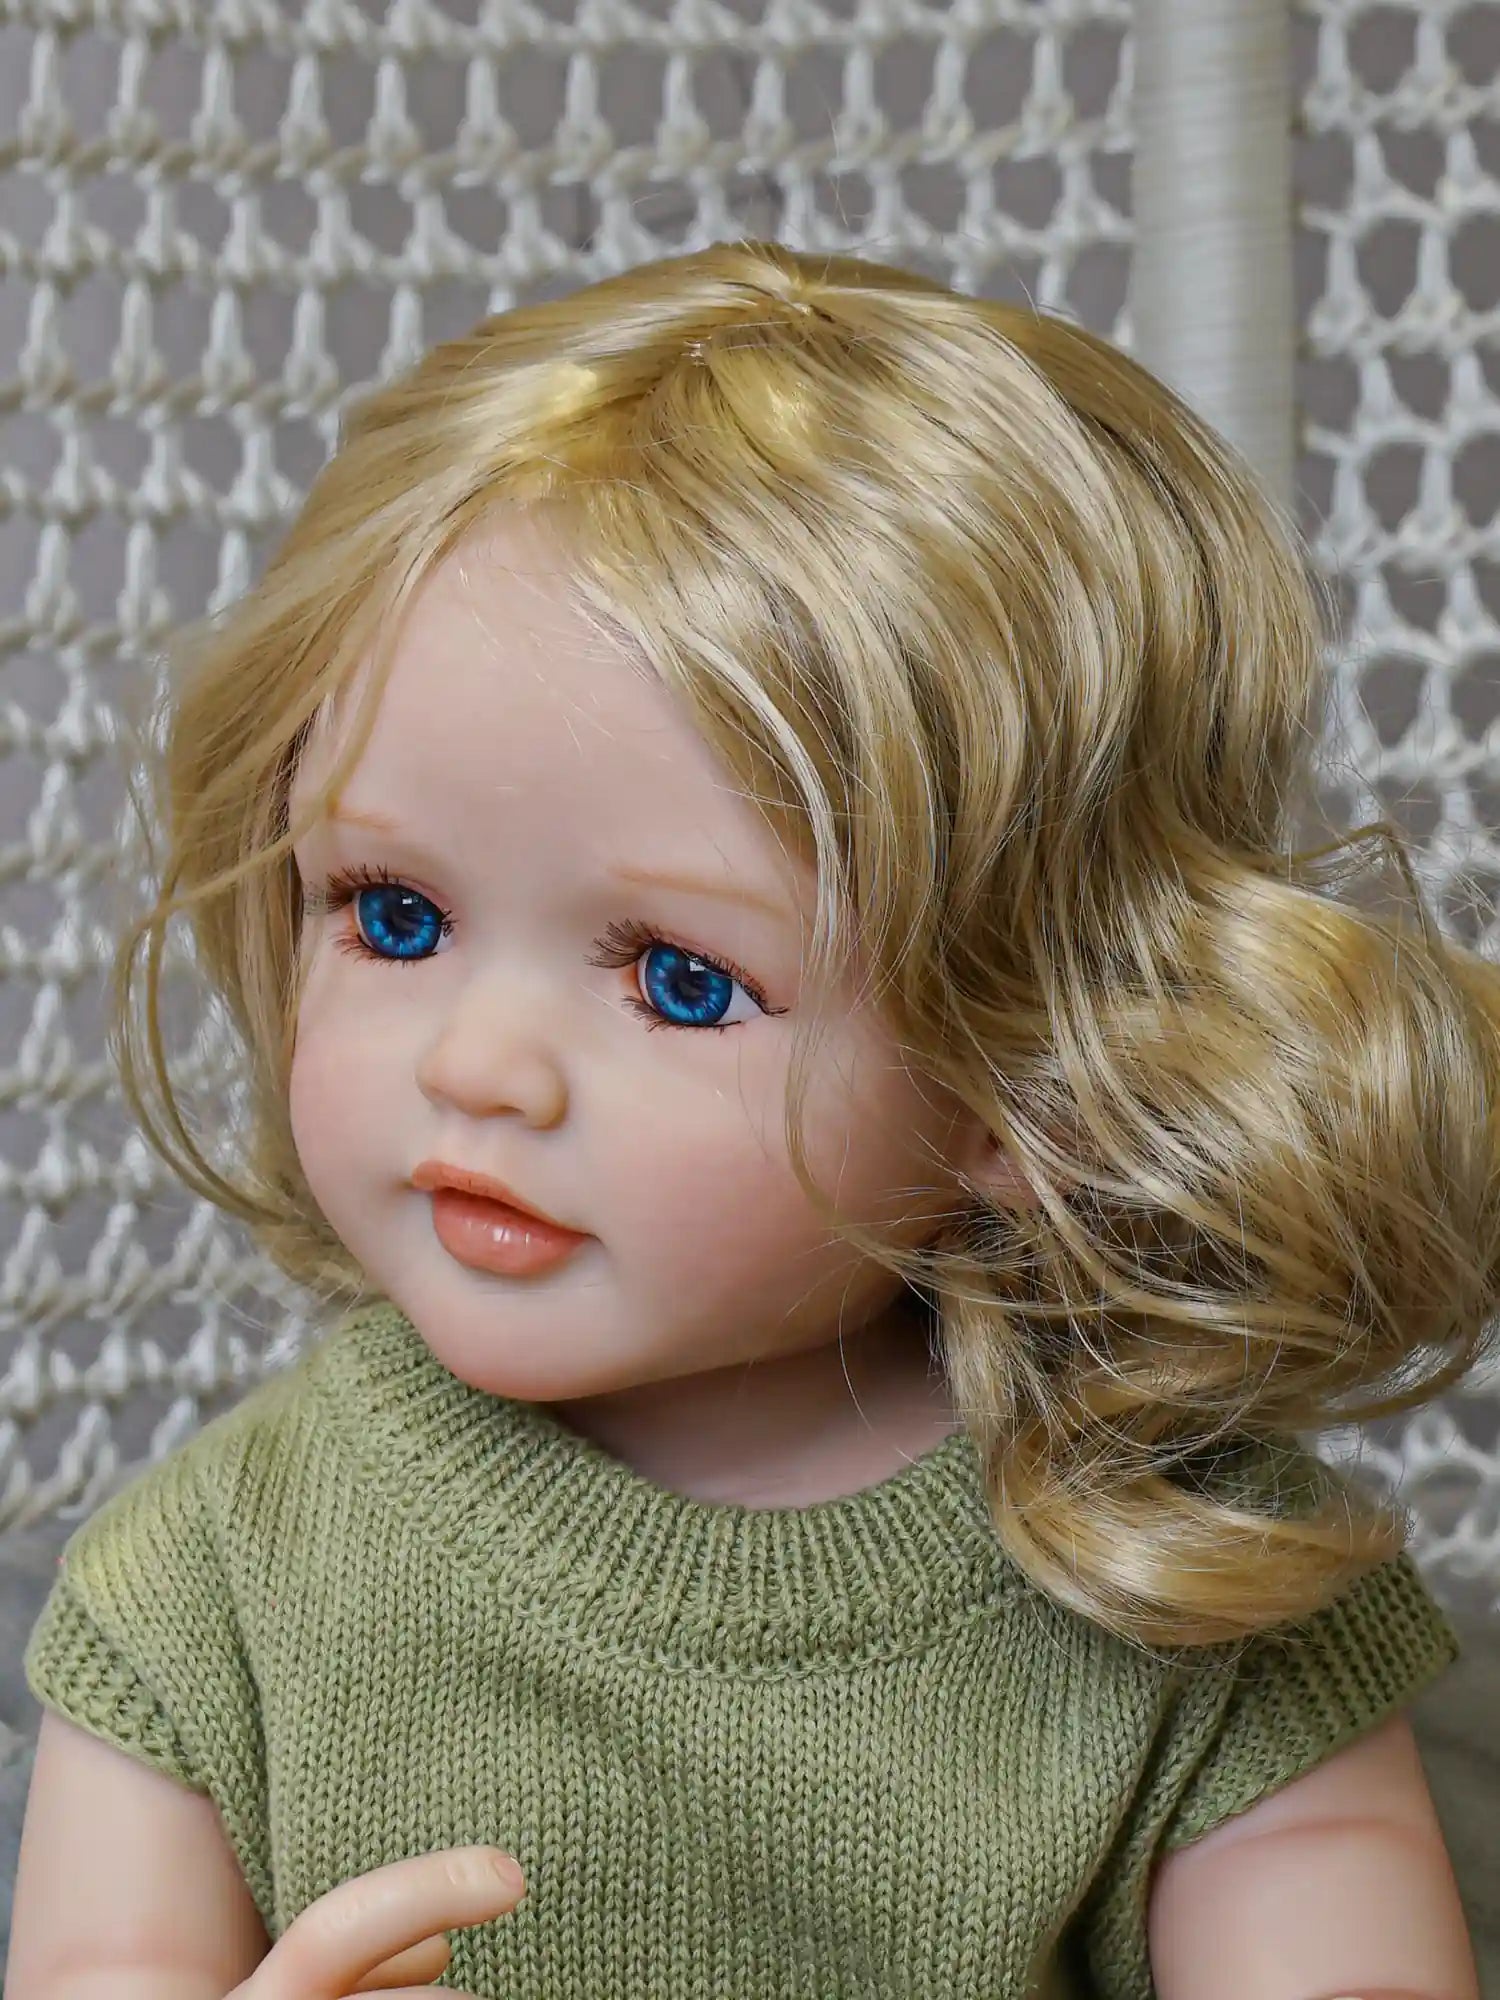 A lifelike reborn doll sitting comfortably, with soft blonde curls and clear blue eyes, dressed in a green outfit with a tulle skirt.